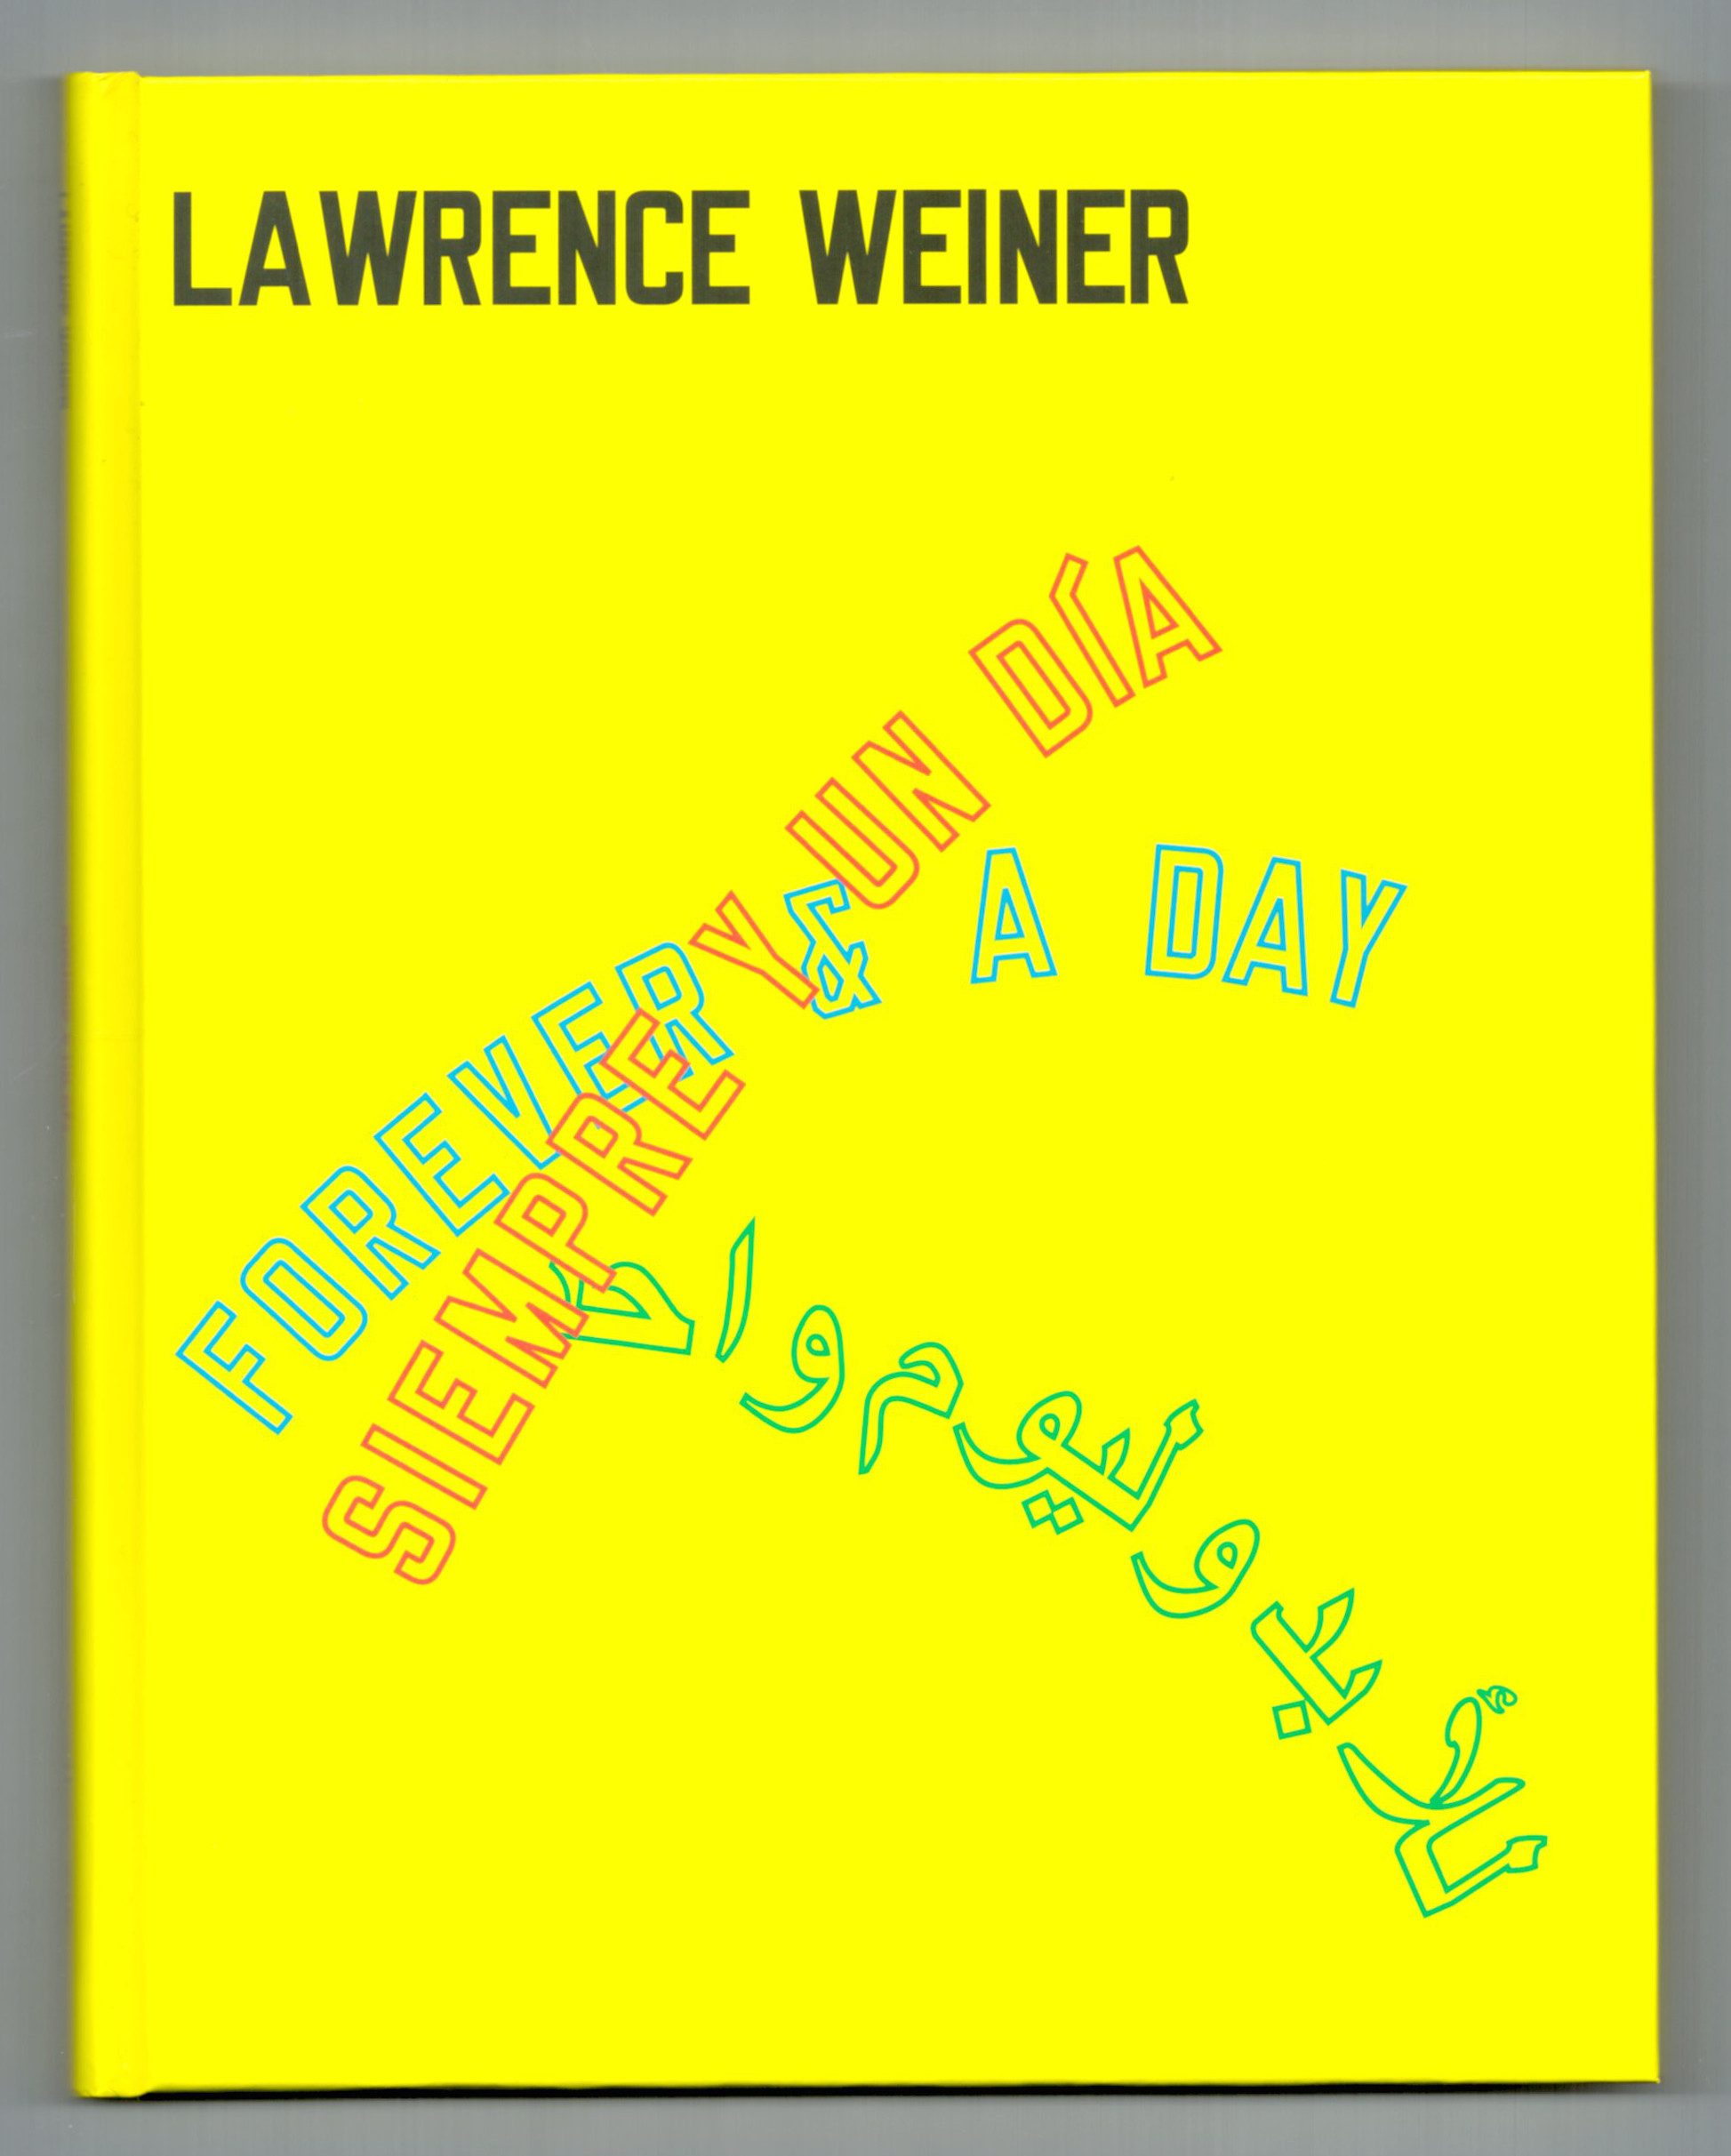 Lawrence WEINER. Siempre y un dia / Forever & a day. - [Lawrence WEINER] - Fernando Francés, Hathryn Chiong.